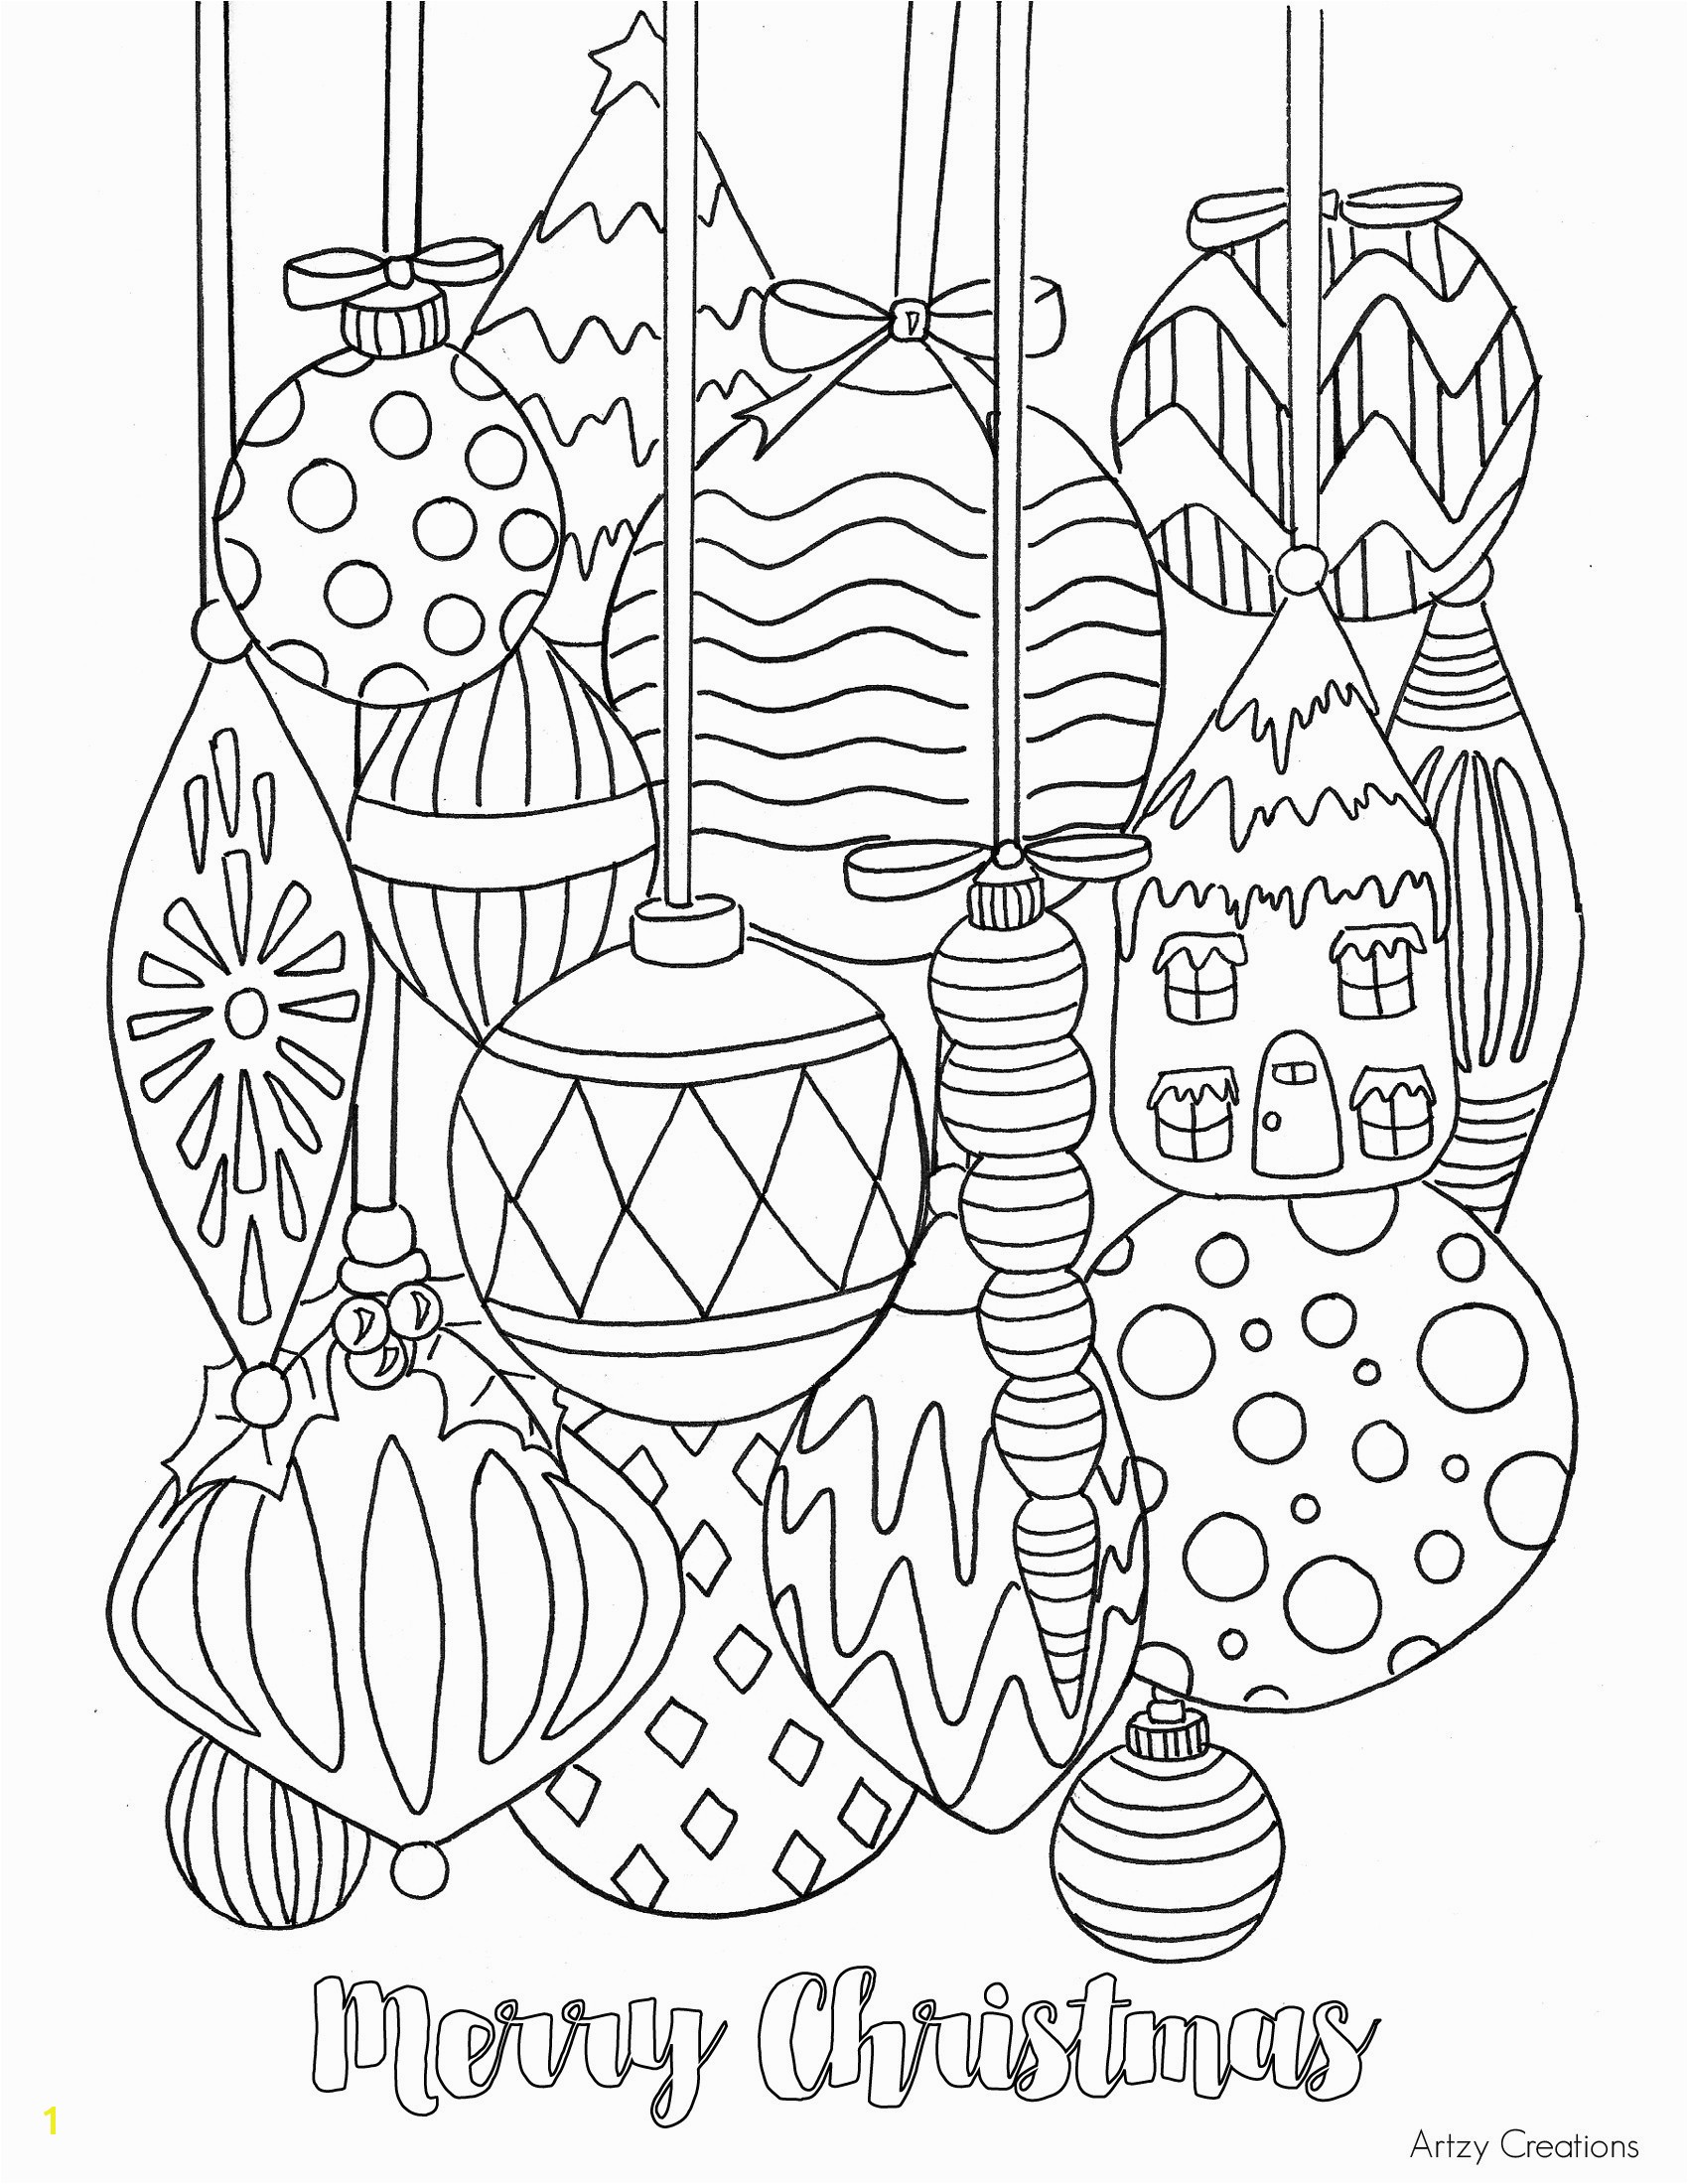 Coloring Pages Of Xylophone Coloring Pages Xylophone Archives Katesgrove